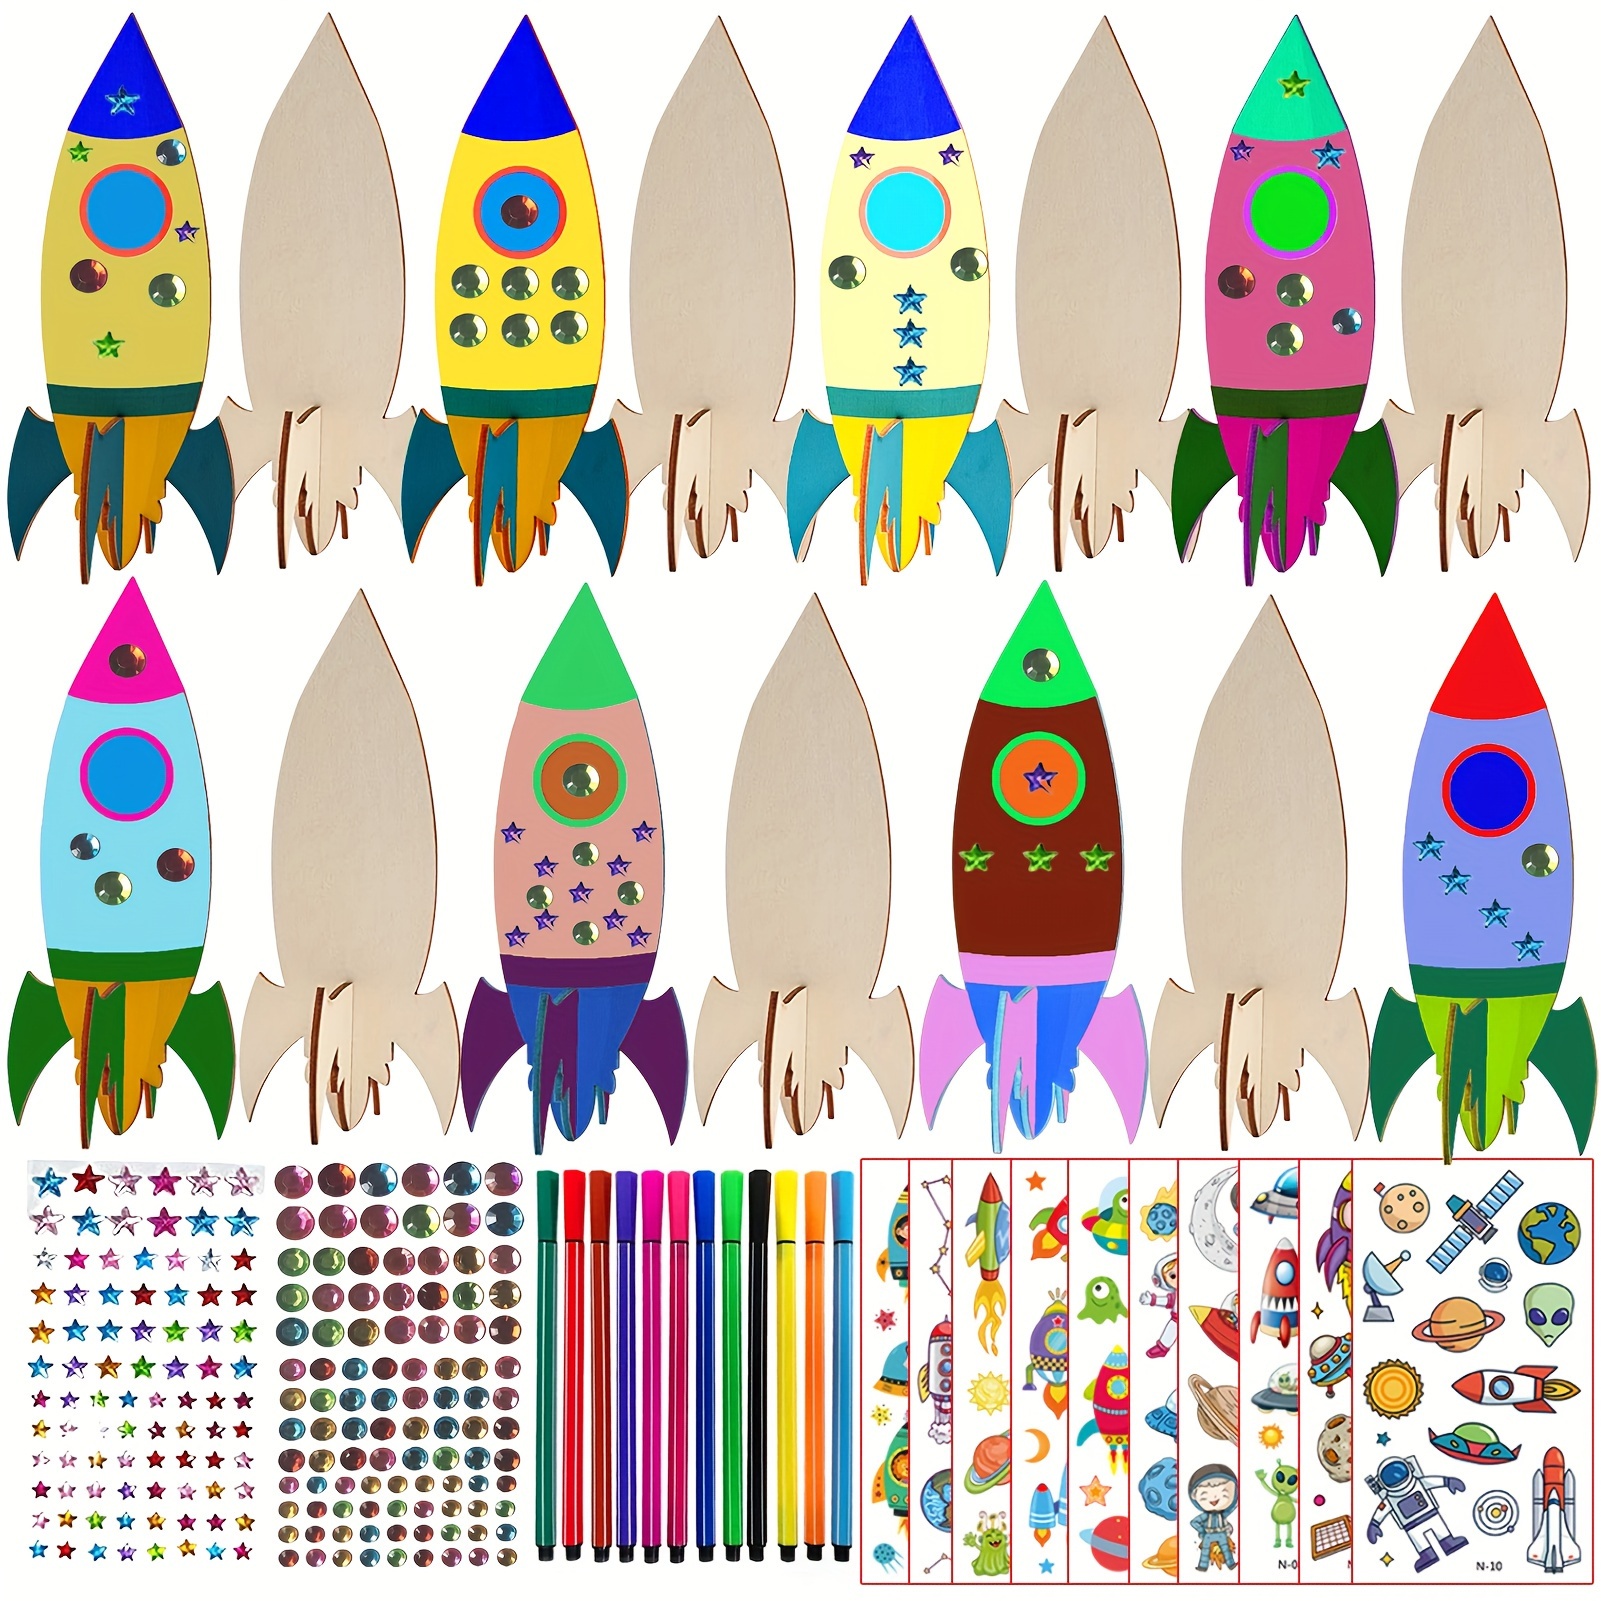 

231-piece Rocket Wood Craft Kit With Sparkling Rhinestones, Colorful Pencils & Stickers - Diy Rocket Building Set For Ages 14+ | Perfect Birthday Gift